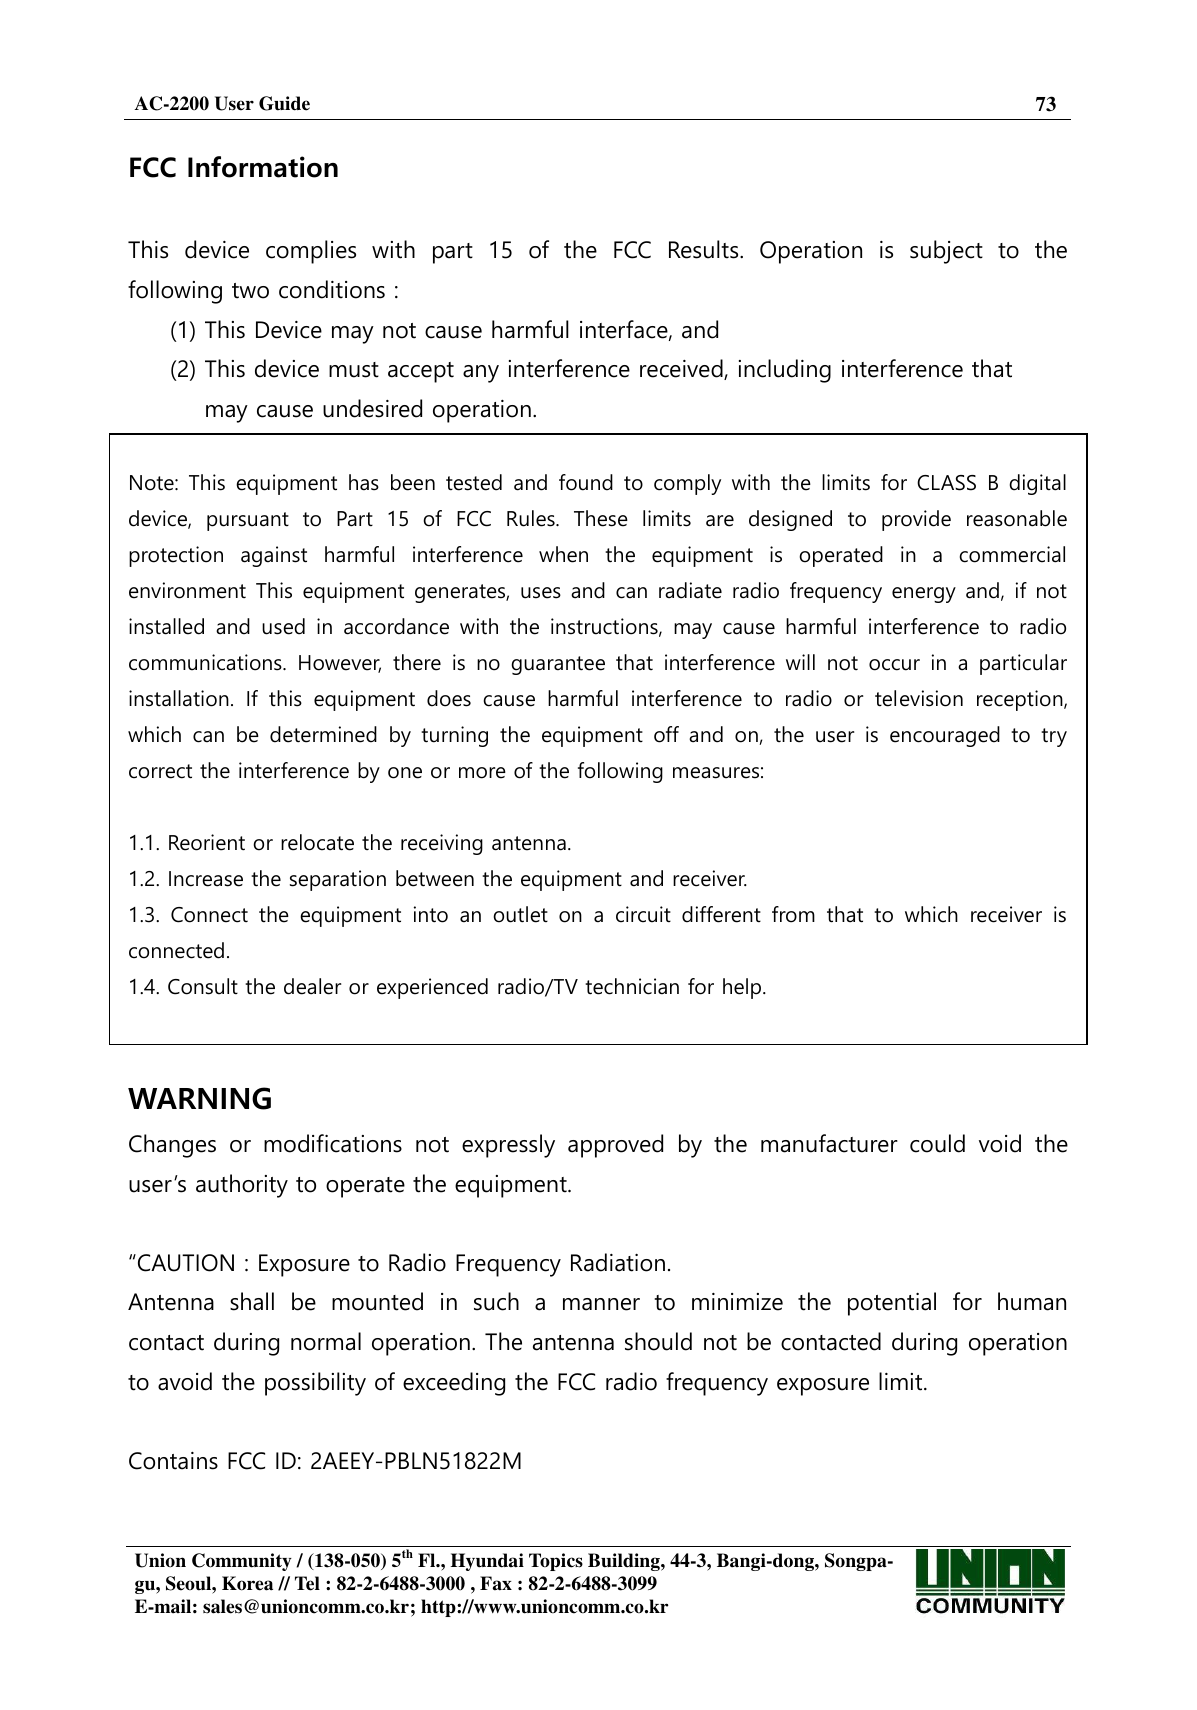  AC-2200 User Guide 73   Union Community / (138-050) 5th Fl., Hyundai Topics Building, 44-3, Bangi-dong, Songpa-gu, Seoul, Korea // Tel : 82-2-6488-3000 , Fax : 82-2-6488-3099 E-mail: sales@unioncomm.co.kr; http://www.unioncomm.co.kr   FCC Information    This  device  complies  with  part  15  of  the  FCC  Results.  Operation  is  subject  to  the following two conditions :   (1) This Device may not cause harmful interface, and     (2) This device must accept any interference received, including interference that       may cause undesired operation.    Note: This equipment has  been  tested and  found  to comply  with  the  limits  for CLASS  B digital device,  pursuant  to  Part  15  of  FCC  Rules.  These  limits  are  designed  to  provide  reasonable protection  against  harmful  interference  when  the  equipment  is  operated  in  a  commercial environment This equipment generates, uses and can radiate radio frequency energy and, if not installed  and  used  in  accordance with  the  instructions,  may  cause  harmful  interference  to  radio communications.  However,  there  is  no  guarantee  that  interference  will  not  occur  in  a  particular installation.  If  this  equipment  does  cause  harmful  interference  to  radio  or  television  reception, which  can  be  determined  by  turning  the  equipment  off  and  on,  the  user  is  encouraged  to  try correct the interference by one or more of the following measures:    1.1. Reorient or relocate the receiving antenna. 1.2. Increase the separation between the equipment and receiver. 1.3.  Connect  the  equipment  into  an  outlet  on  a  circuit  different  from  that  to  which  receiver  is connected. 1.4. Consult the dealer or experienced radio/TV technician for help.   WARNING Changes  or  modifications  not  expressly  approved  by  the  manufacturer  could  void  the user’s authority to operate the equipment.  “CAUTION : Exposure to Radio Frequency Radiation. Antenna  shall  be  mounted  in  such  a  manner  to  minimize  the  potential  for  human contact during normal operation. The antenna should not be contacted during operation to avoid the possibility of exceeding the FCC radio frequency exposure limit.  Contains FCC ID: 2AEEY-PBLN51822M  